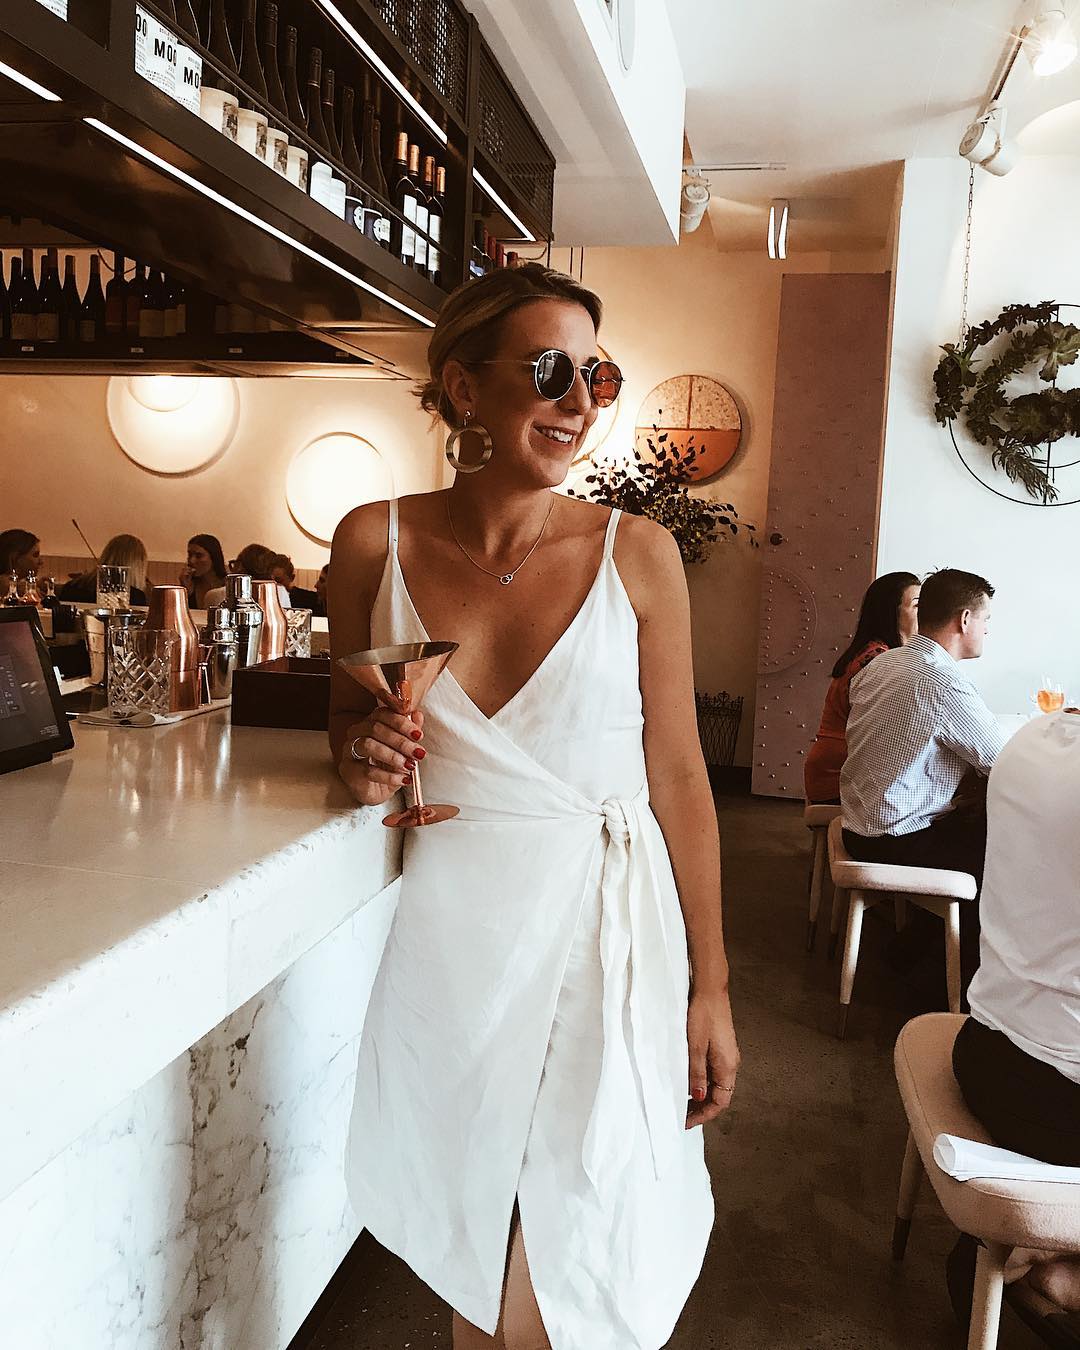 All White Wrap Dress For Day Out In Summer